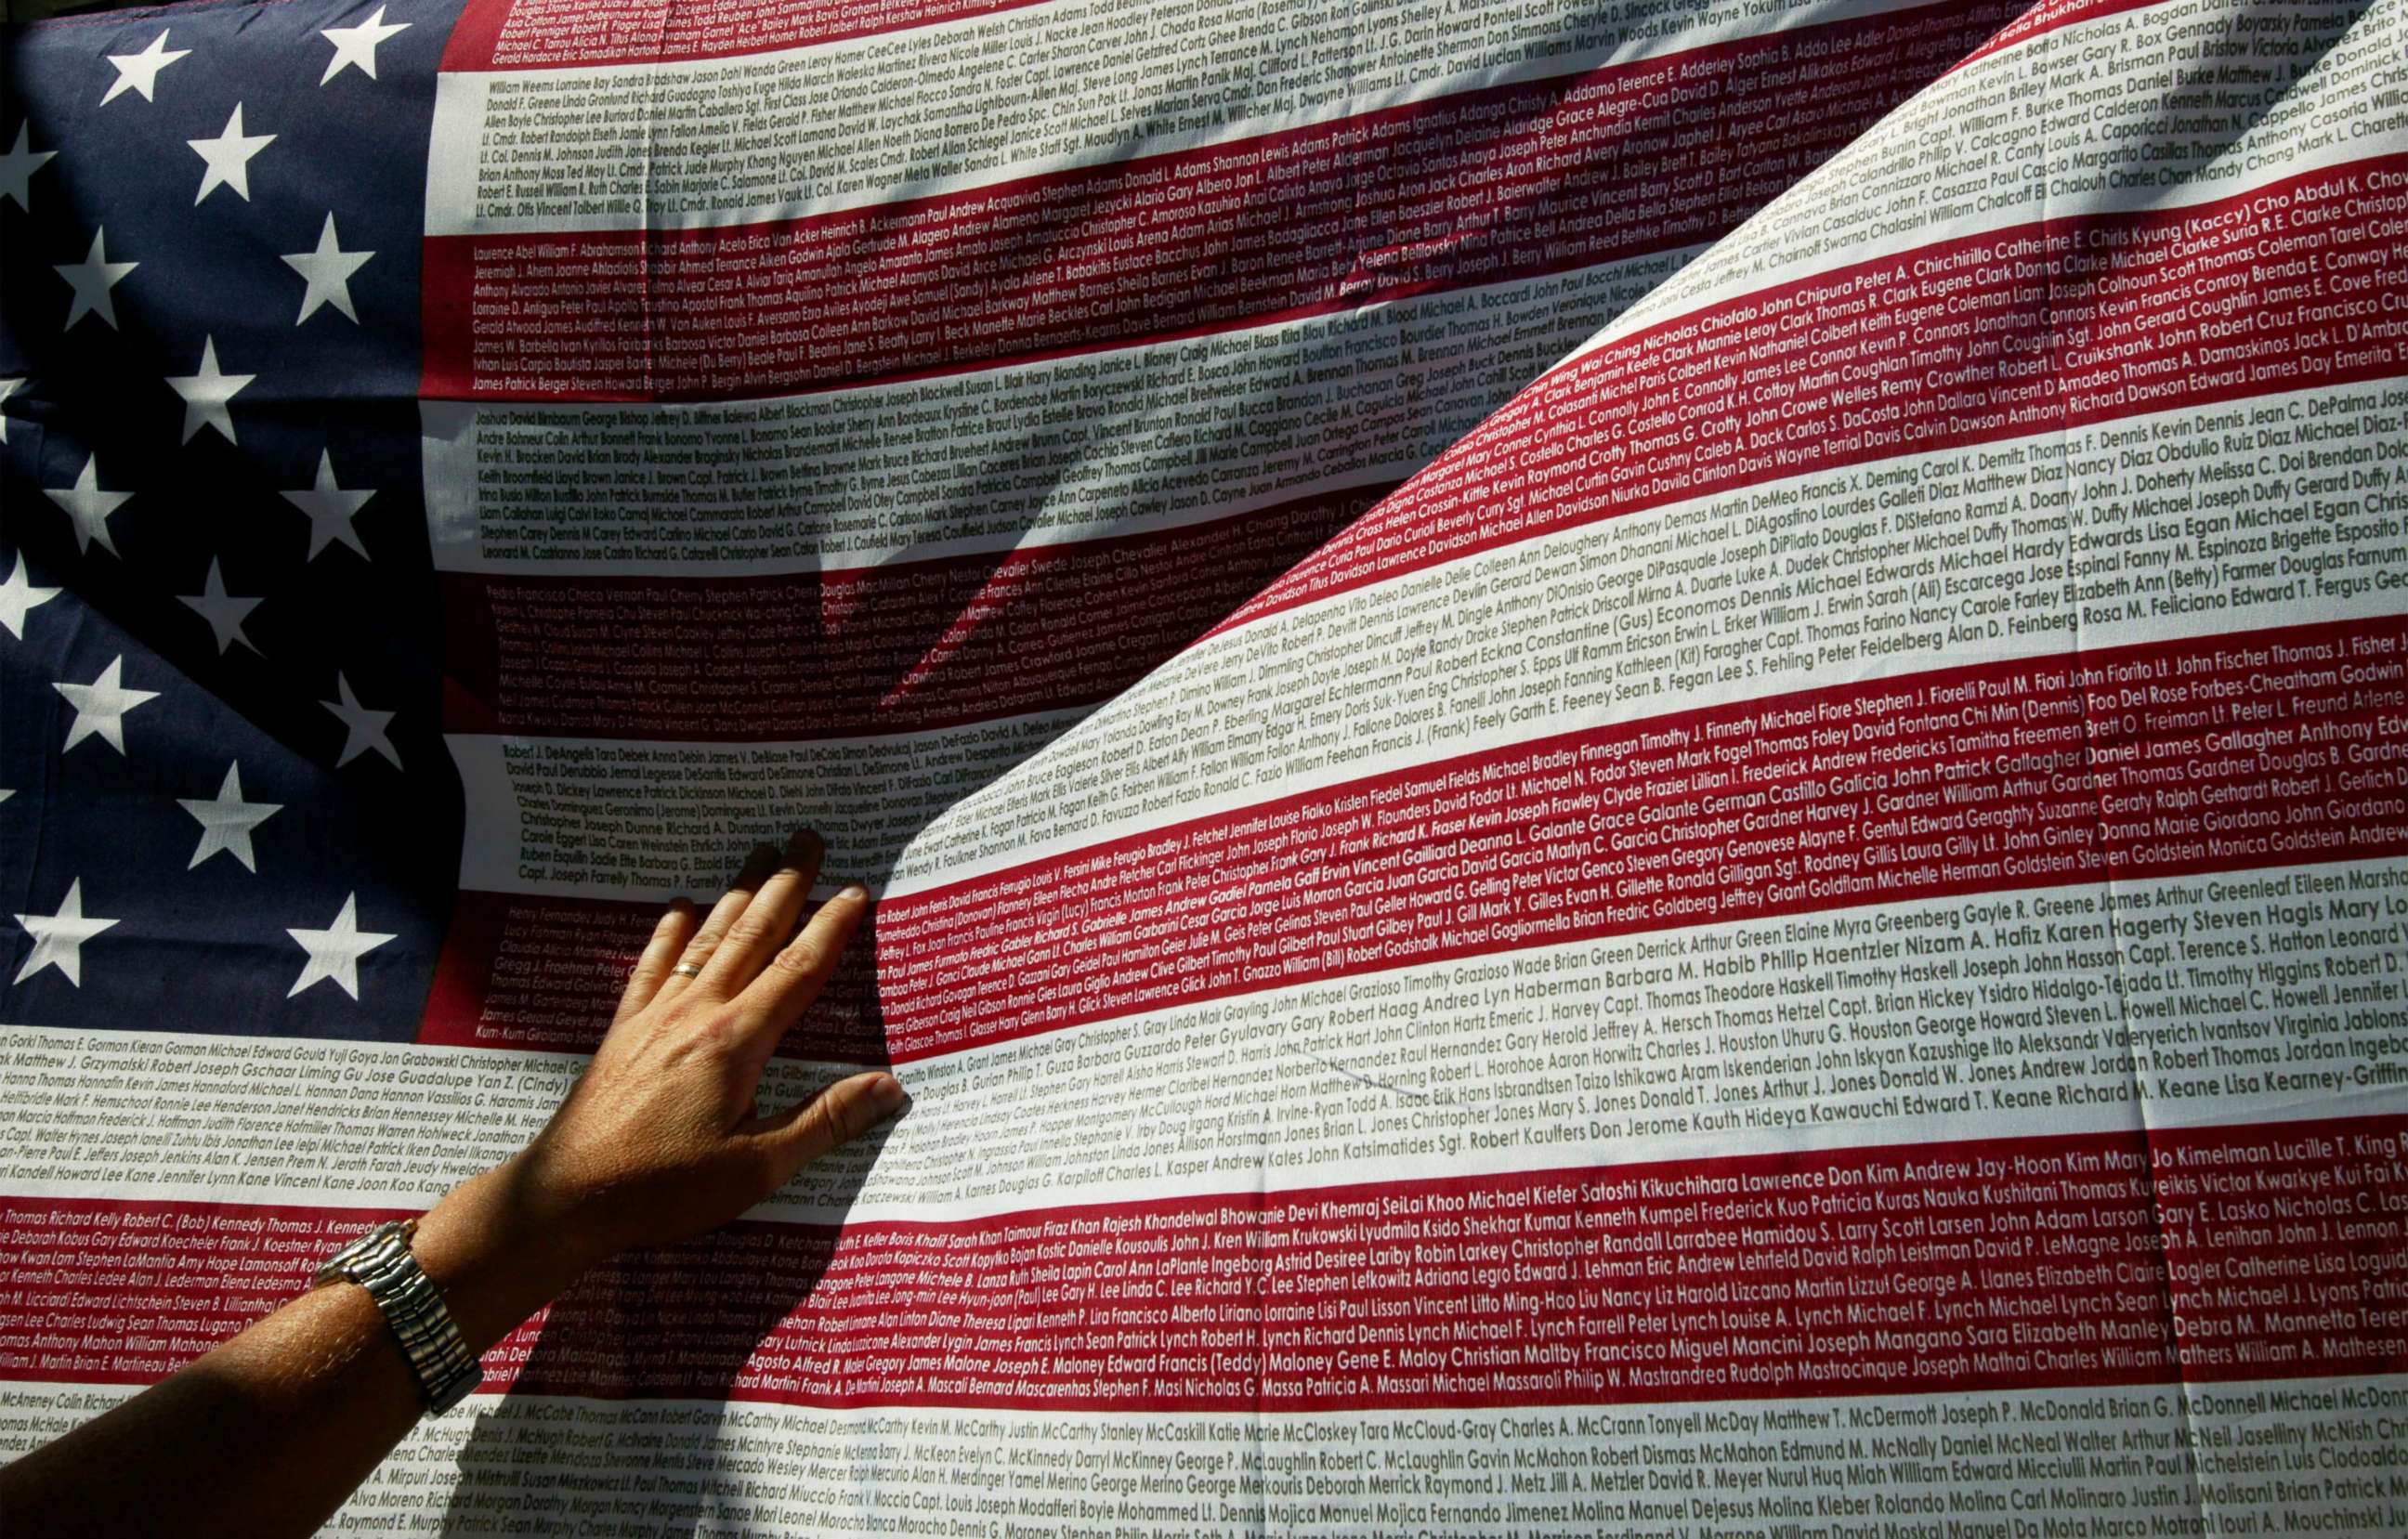 PHOTO: A relative of a victim of the Sept. 11th terrorist attacks looks for a name on a flag with names of the victims at the World Trade Center site, Sept. 10, 2003, in New York.